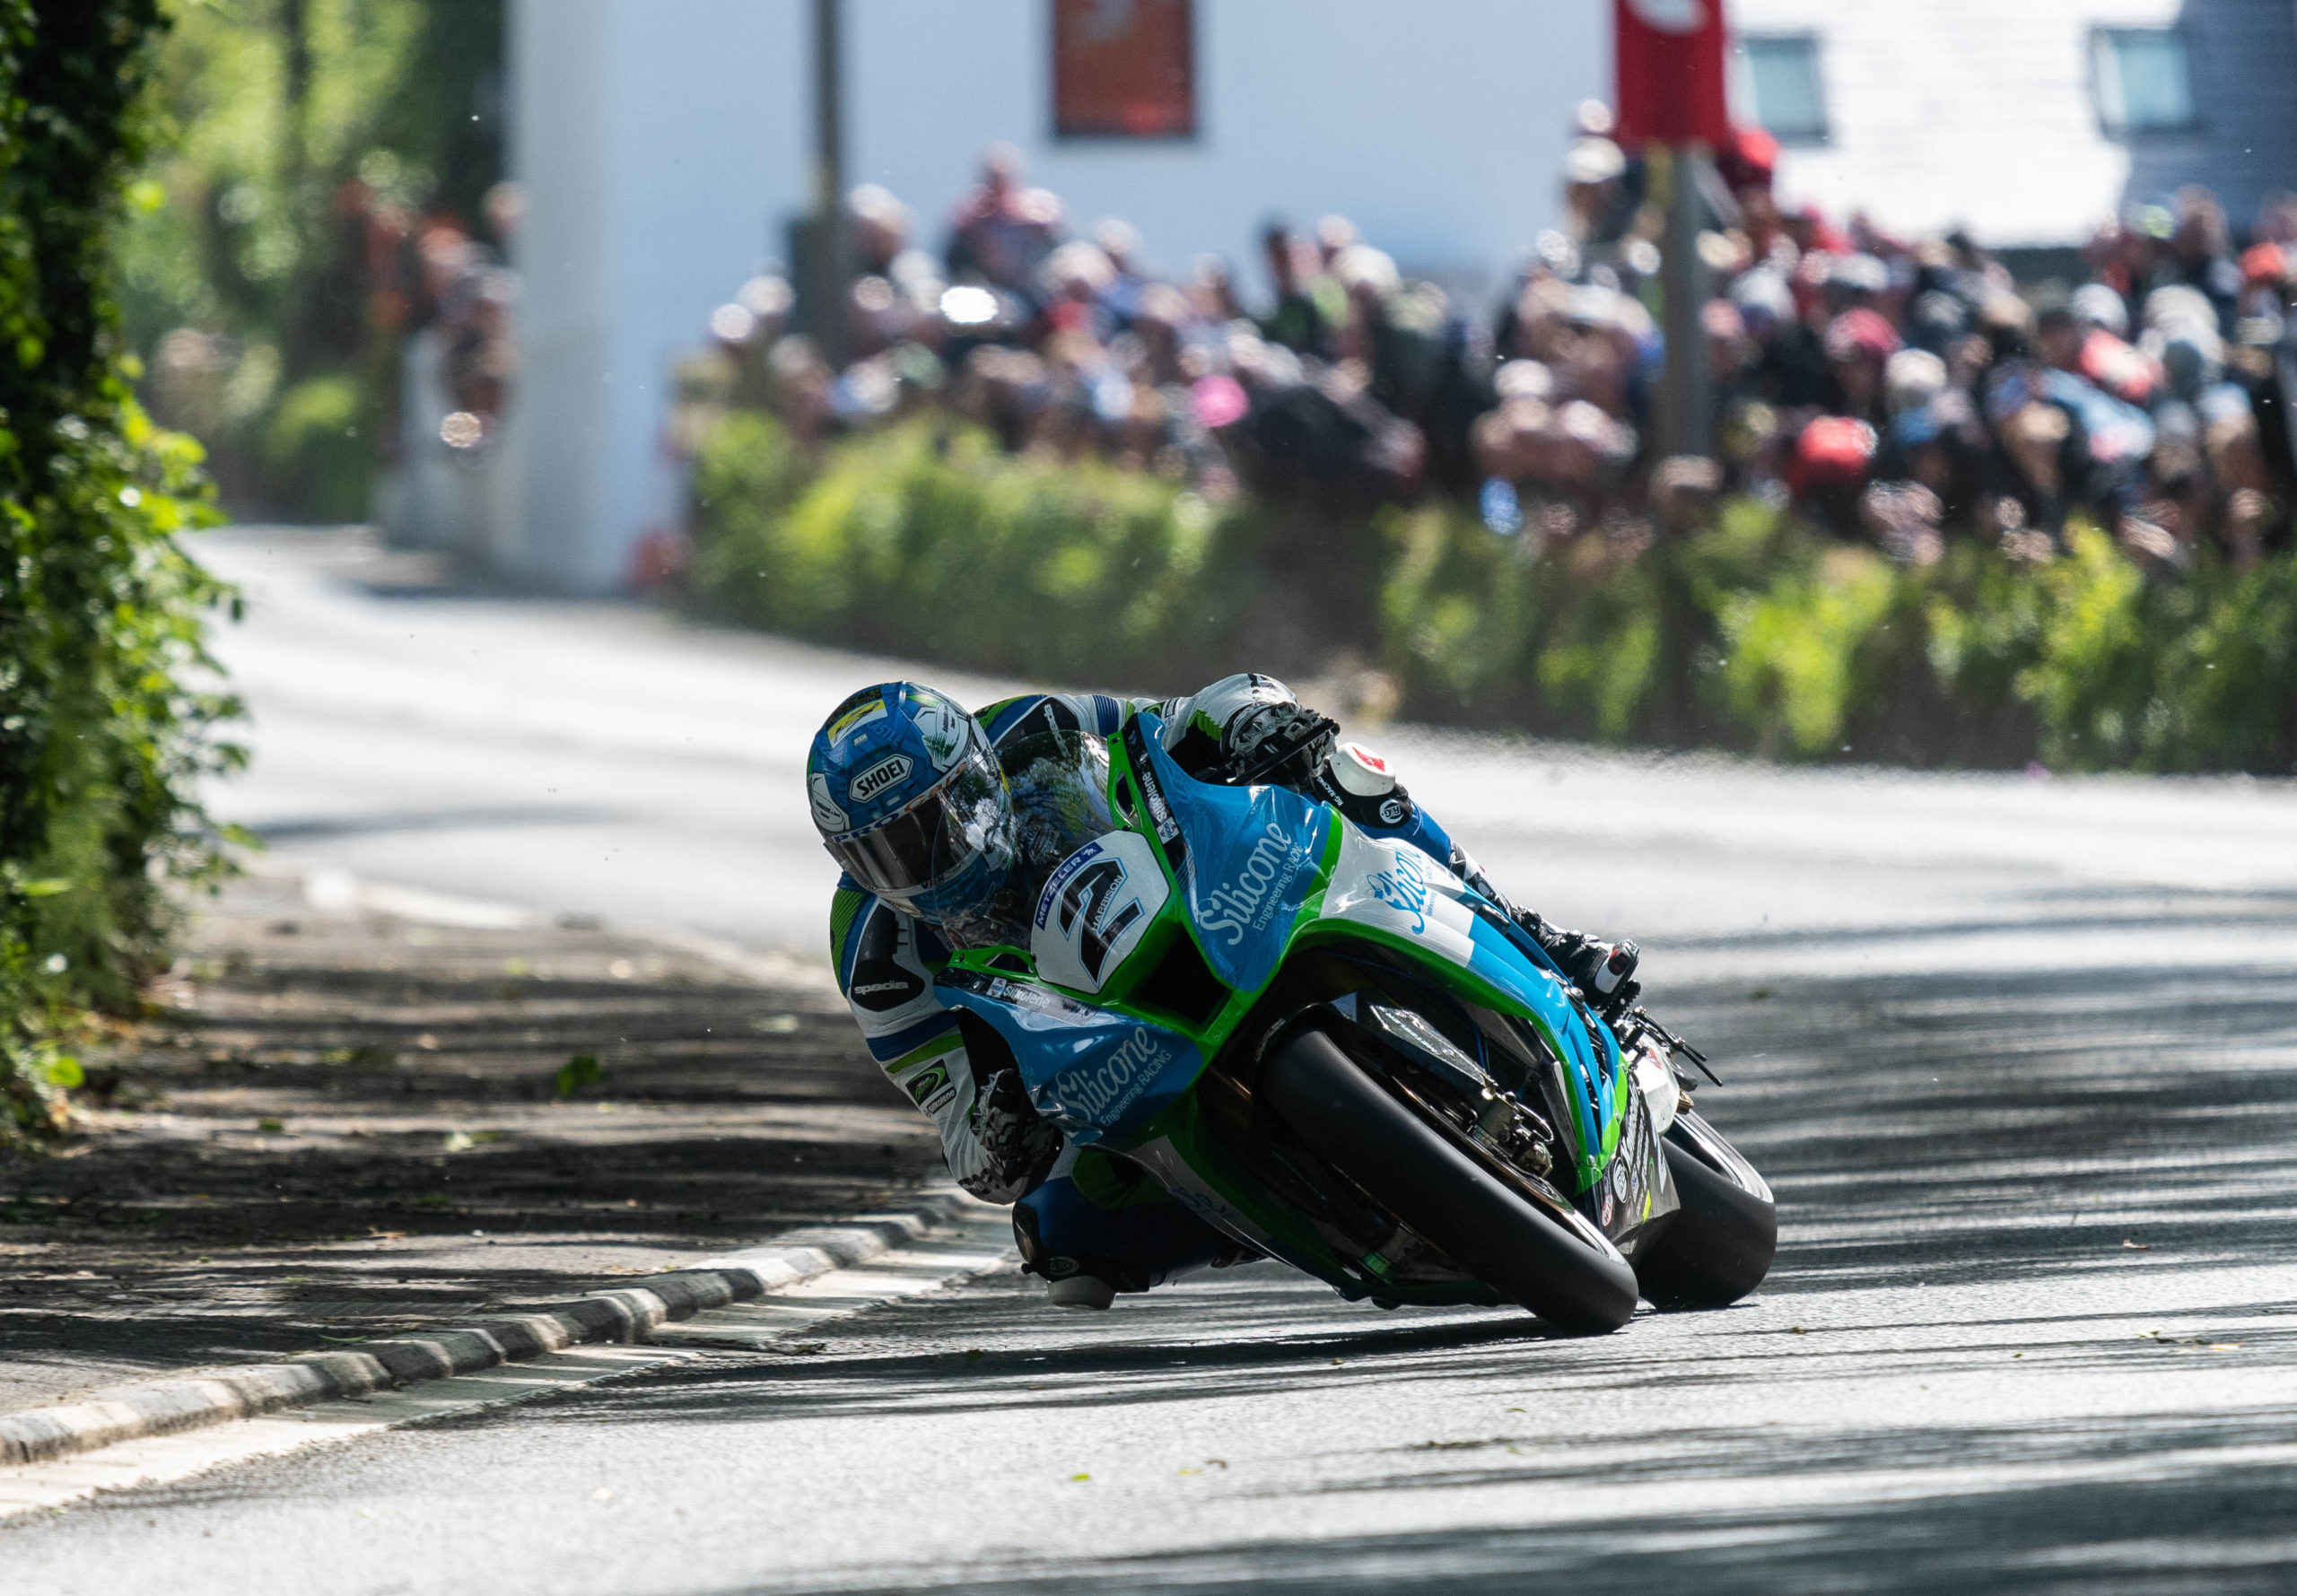 Dean Harrison on his Silicone Engineering Racing Kawasaki at Gorse Lee during the Superbike race at TT2019.